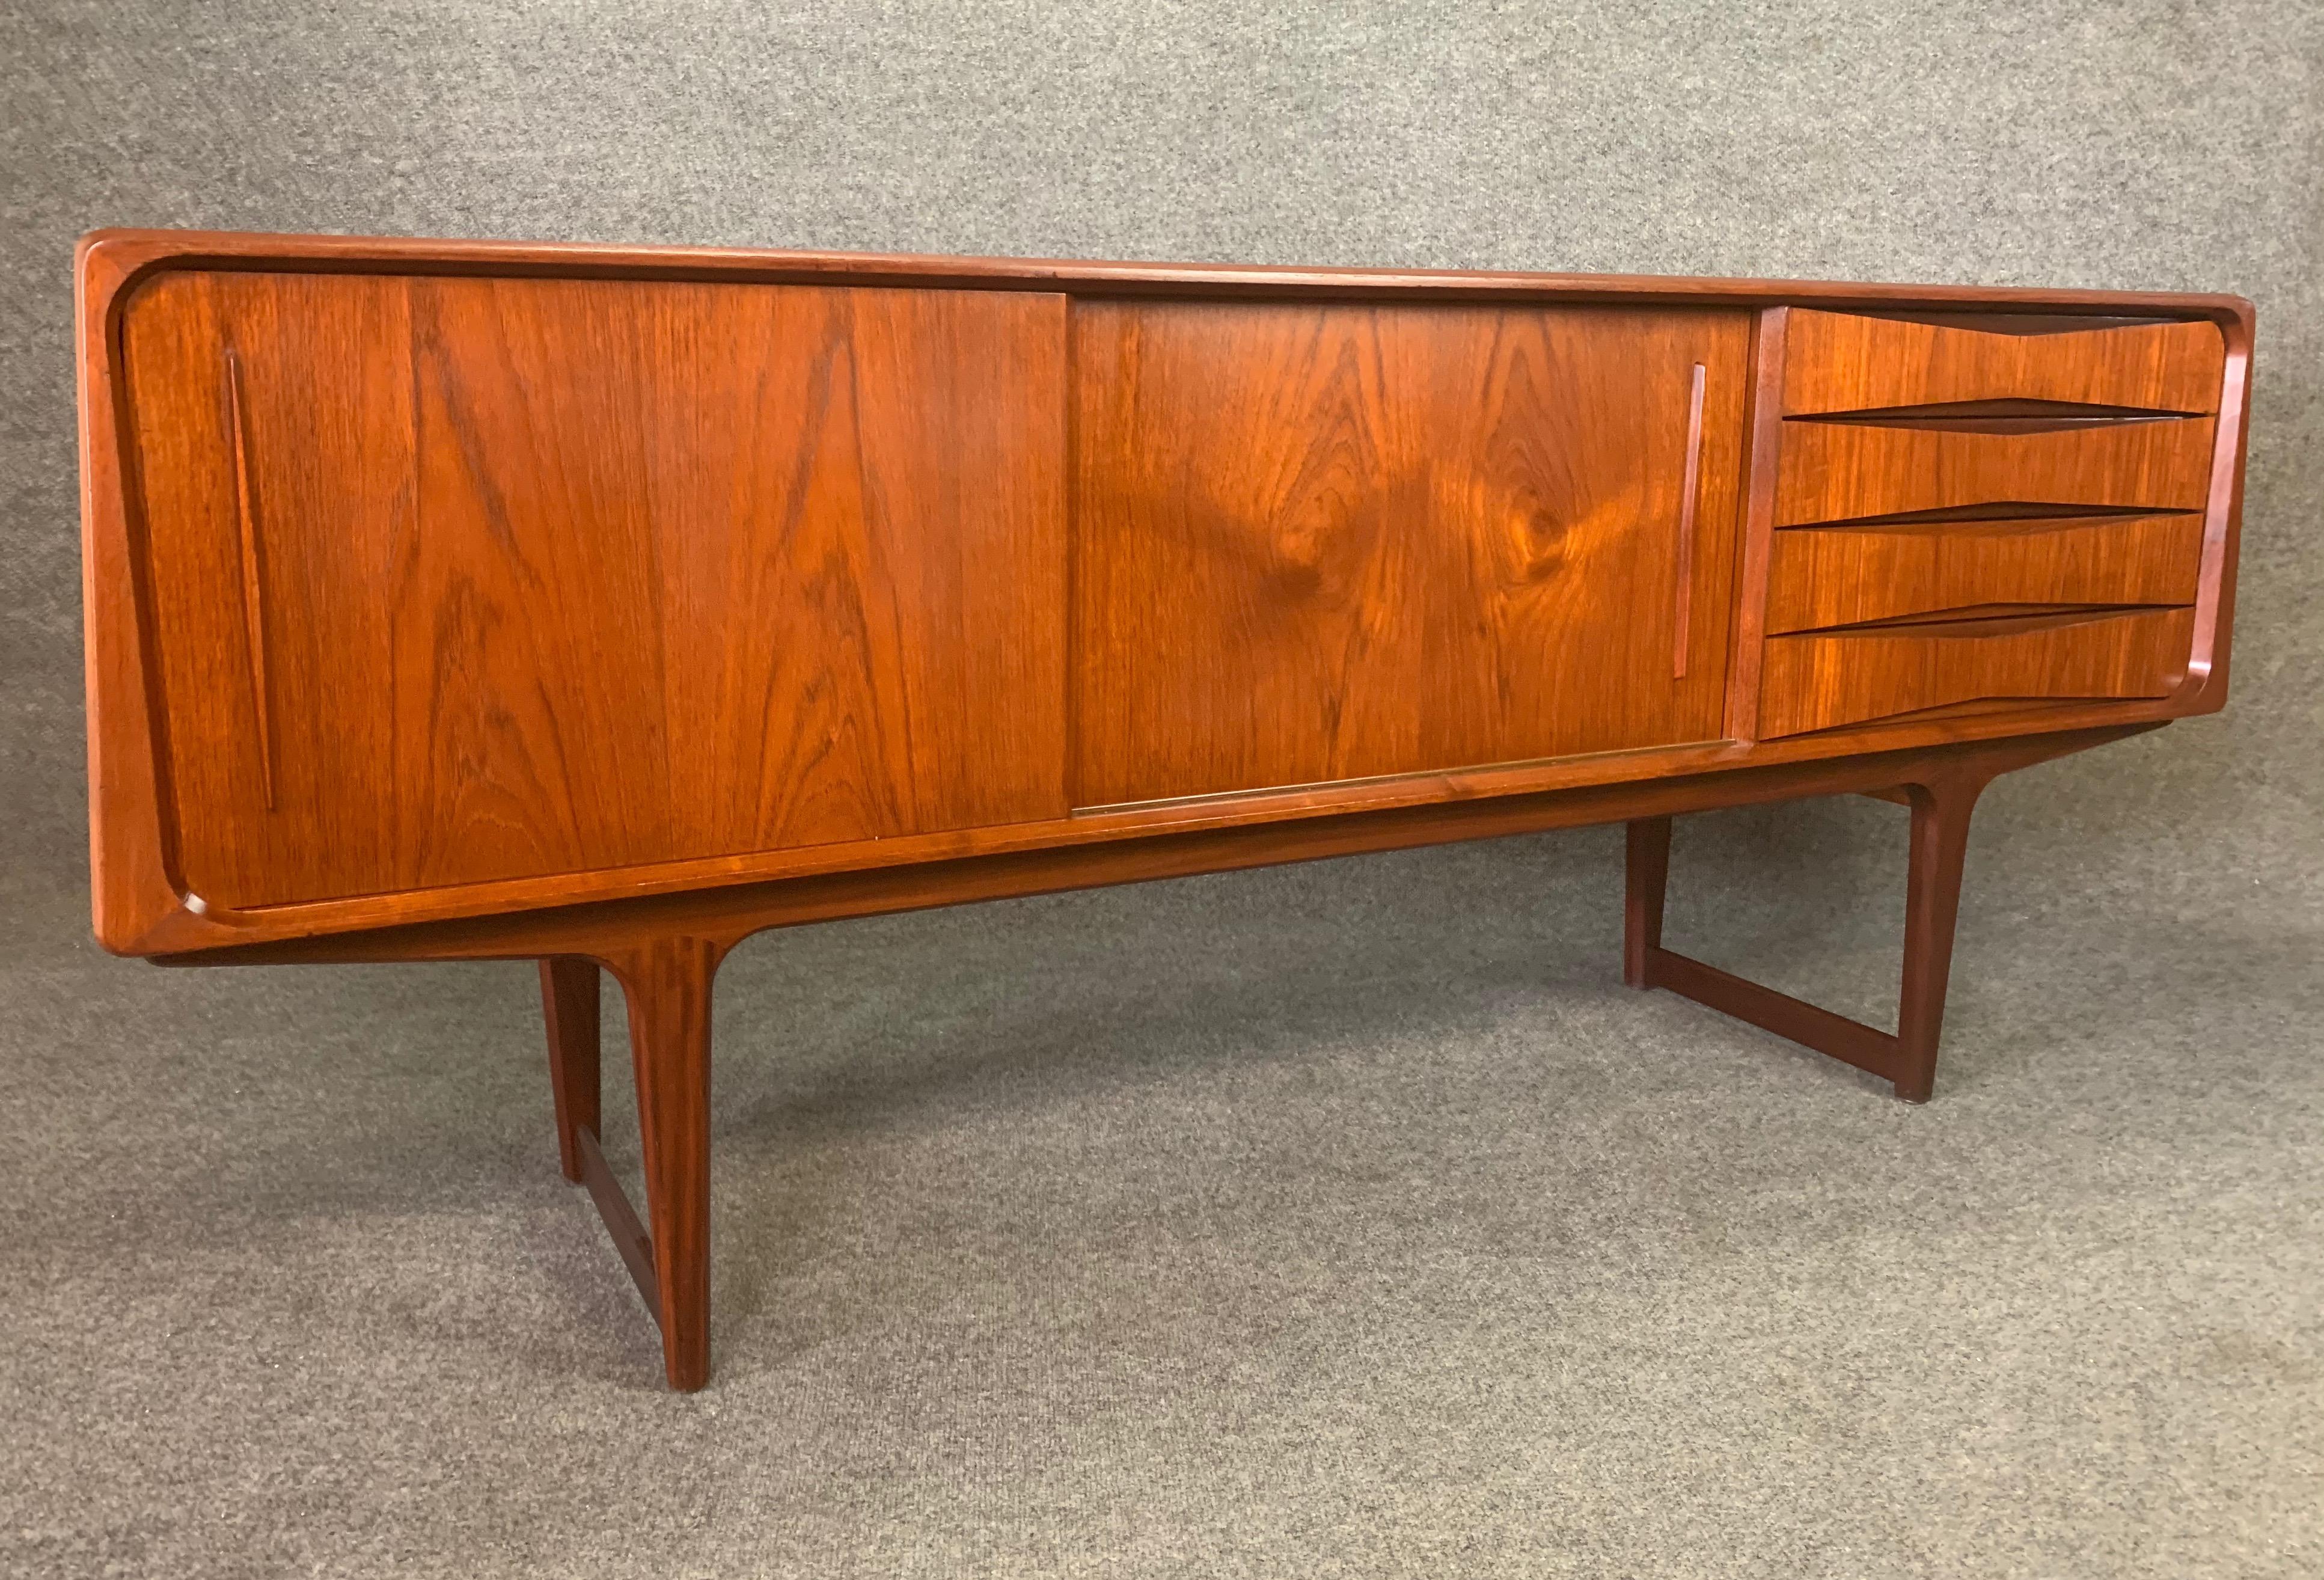 Here's a beautiful Scandinavian Modern sideboard in teak manufactured in Denmark in the 1960s.
This special case piece, recently imported from Copenhagen to California before its restoration, features a vibrant wood grain, two sliding doors, four